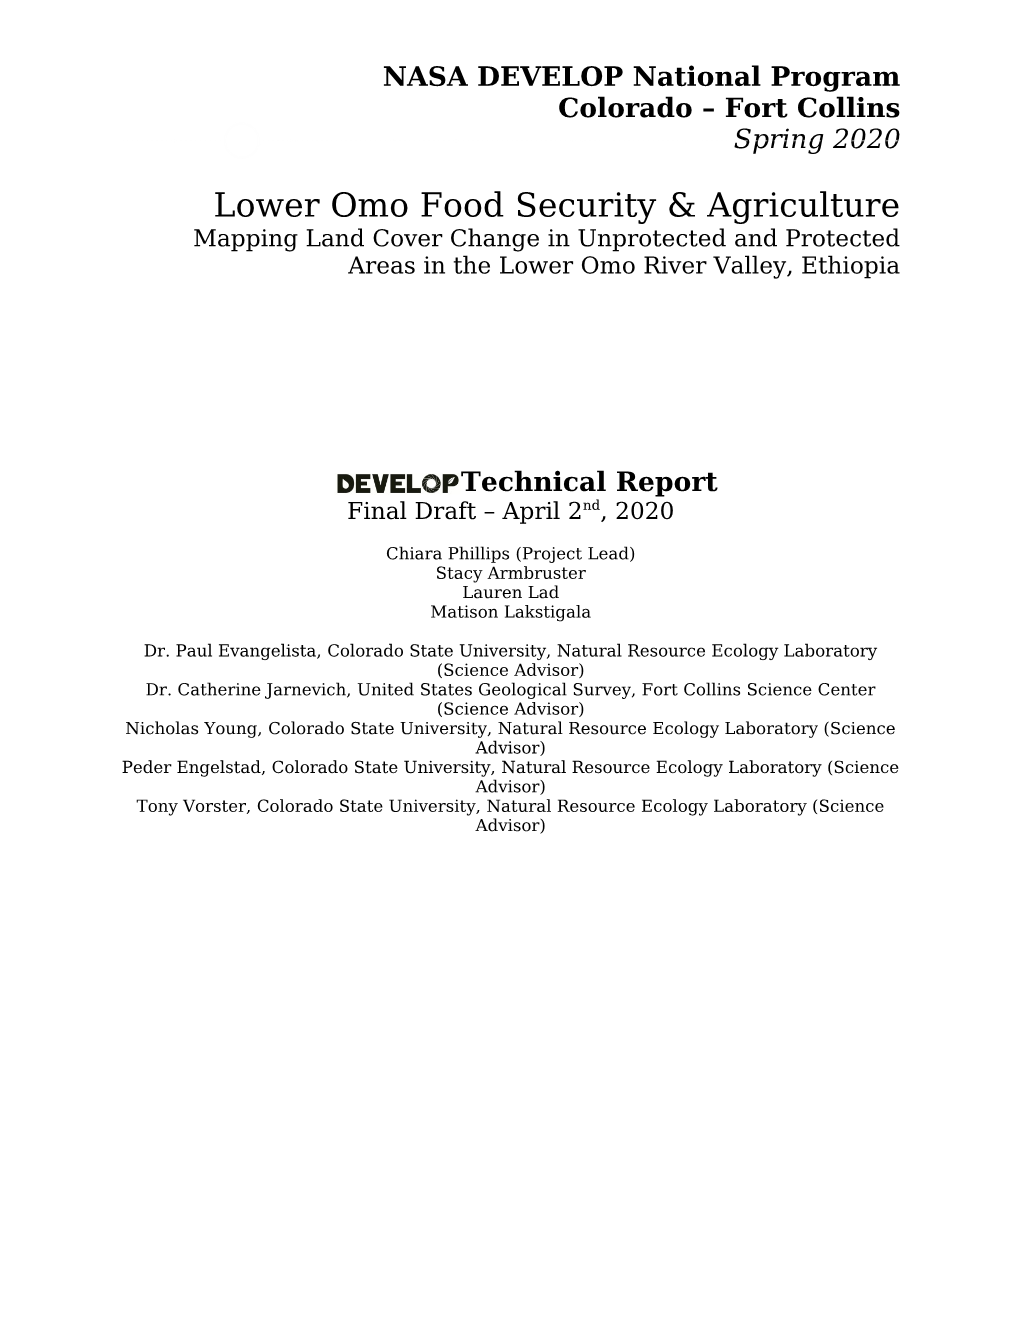 Lower Omo Food Security & Agriculture